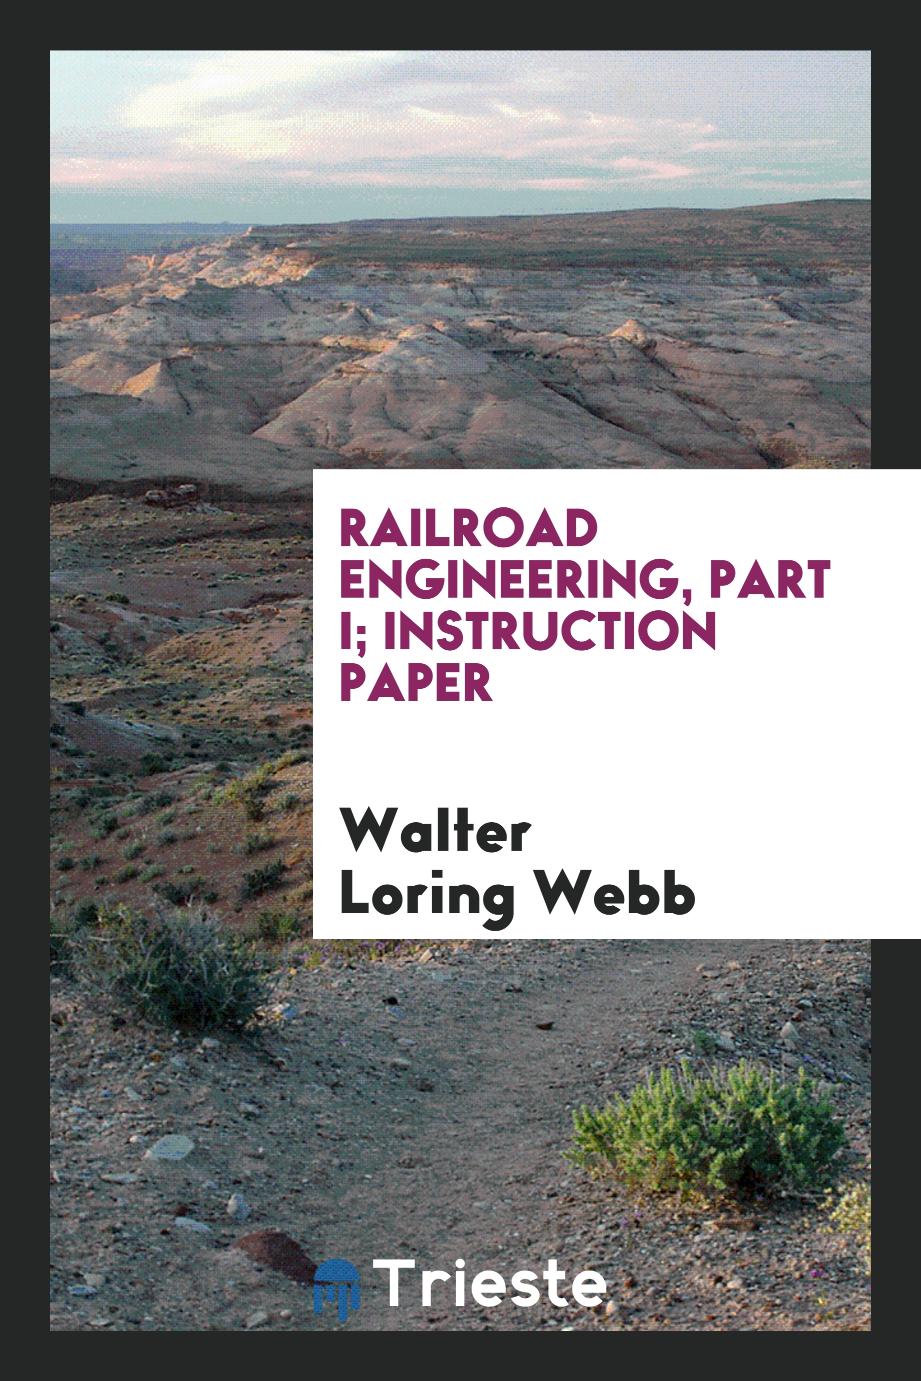 Railroad Engineering, Part I; Instruction Paper